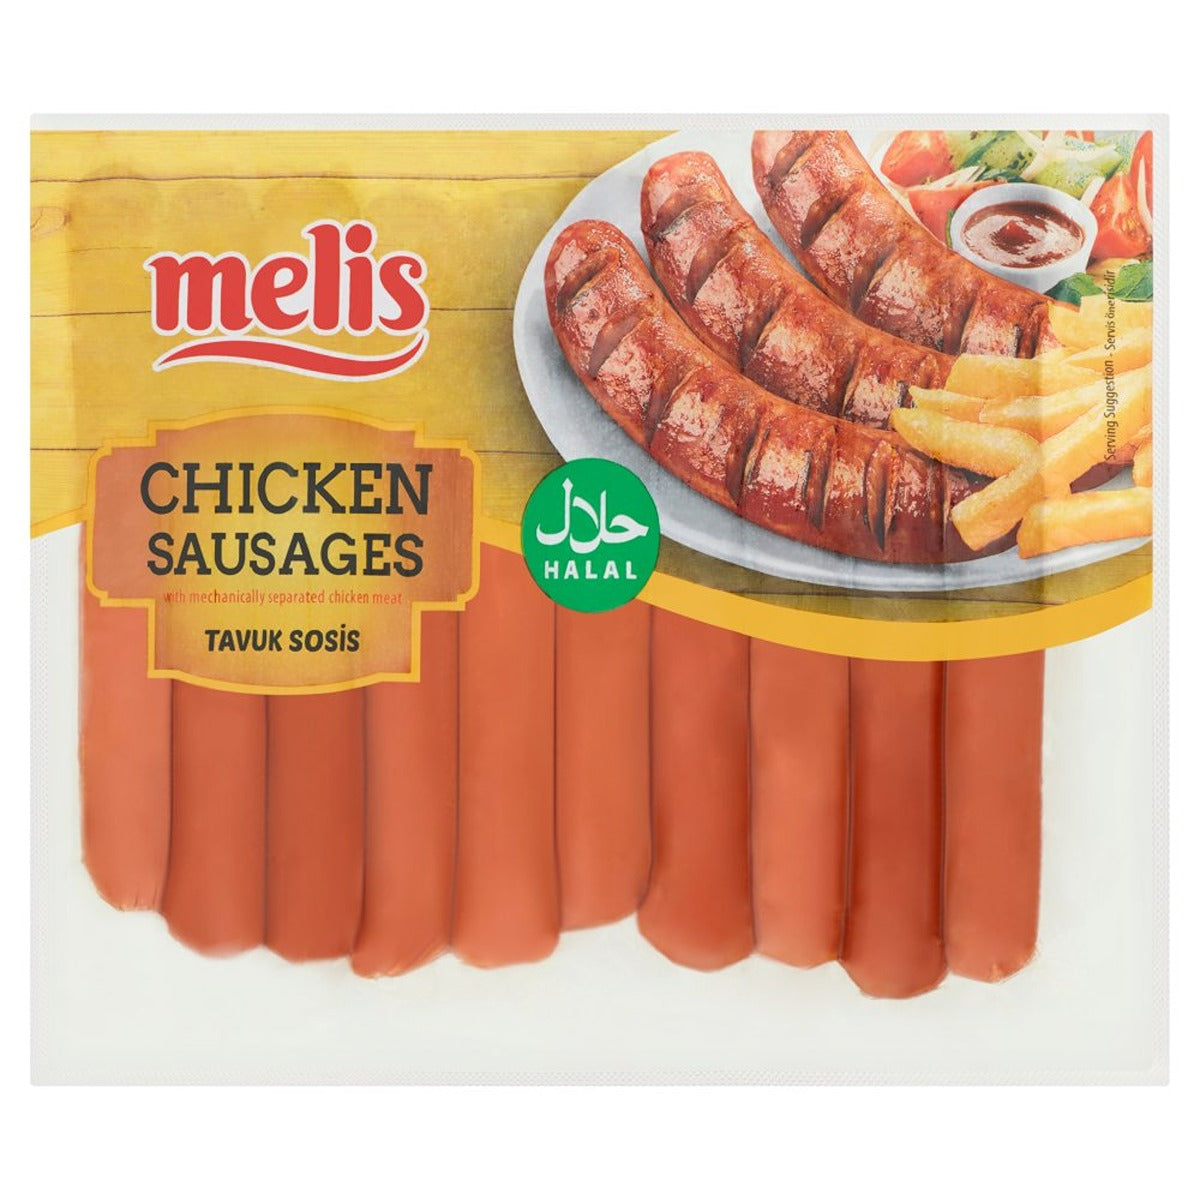 Melis - Chicken Sausages - 500g - Continental Food Store